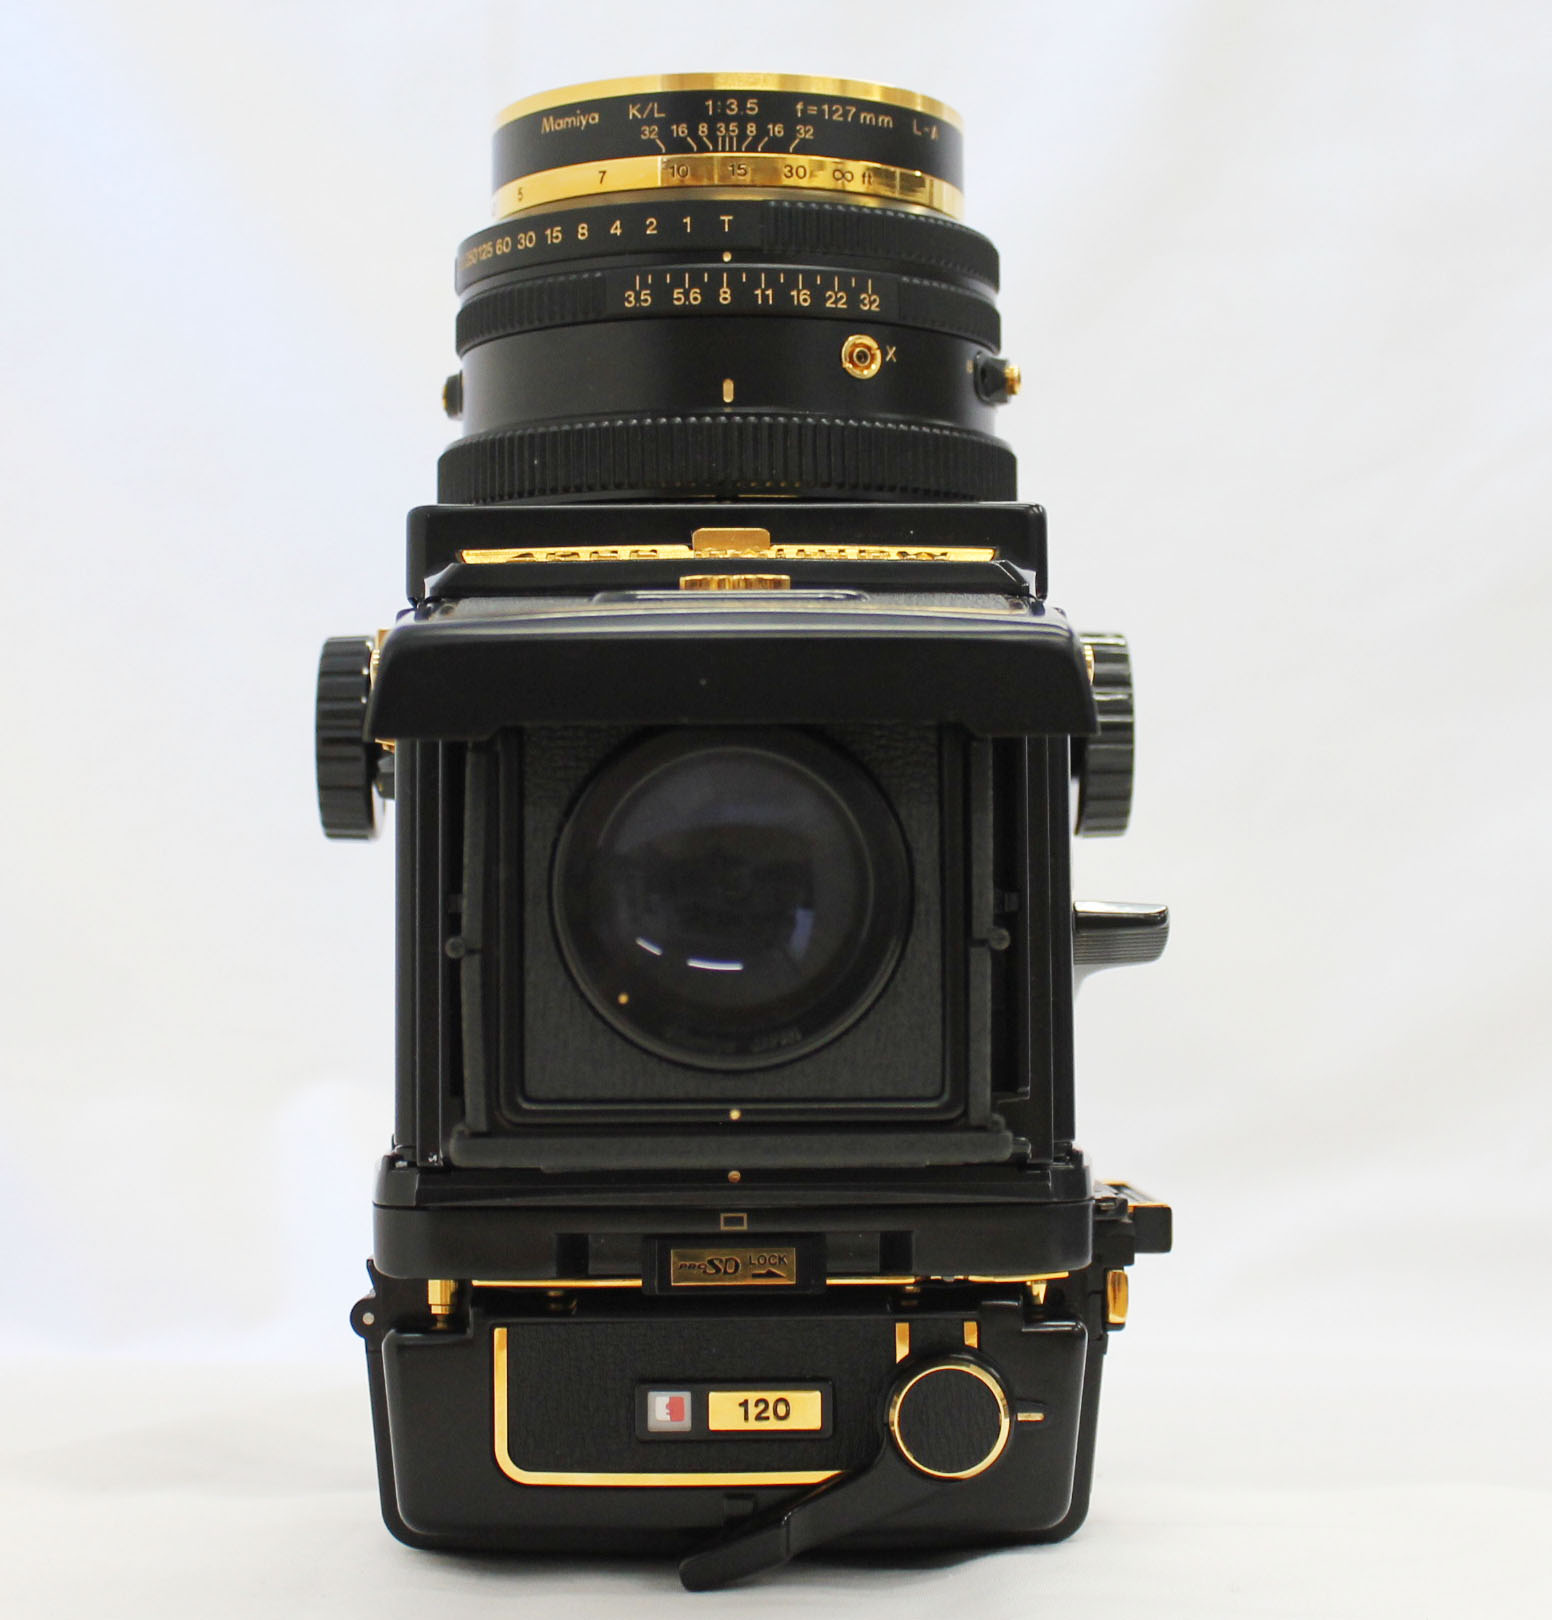 Mamiya RB67 Pro SD Gold K/L 127mm F/3.5 50 Years Limited Edition of 300 from Japan Photo 6